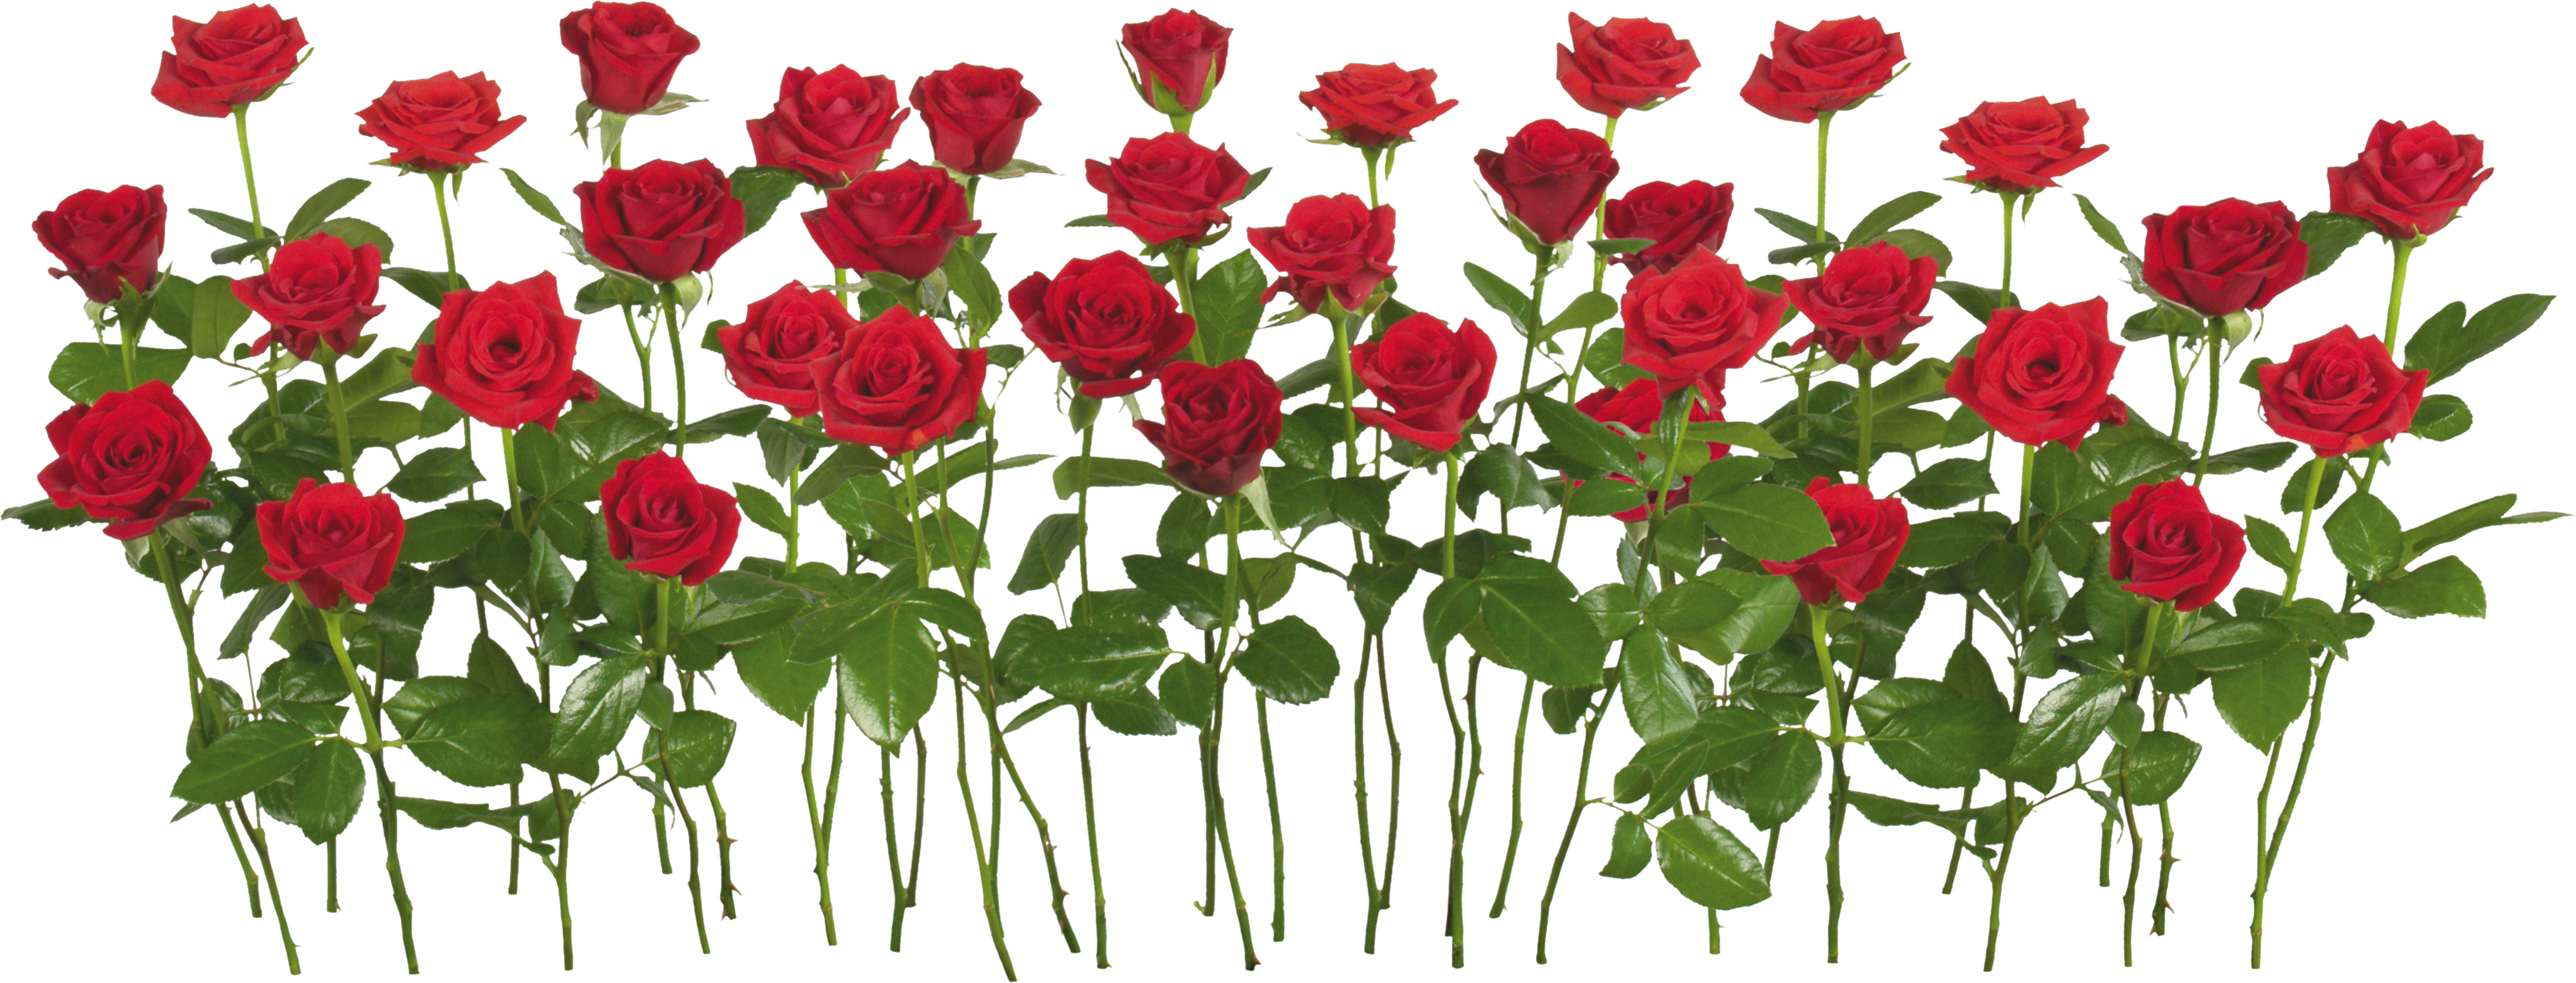 Rose png image, free picture download